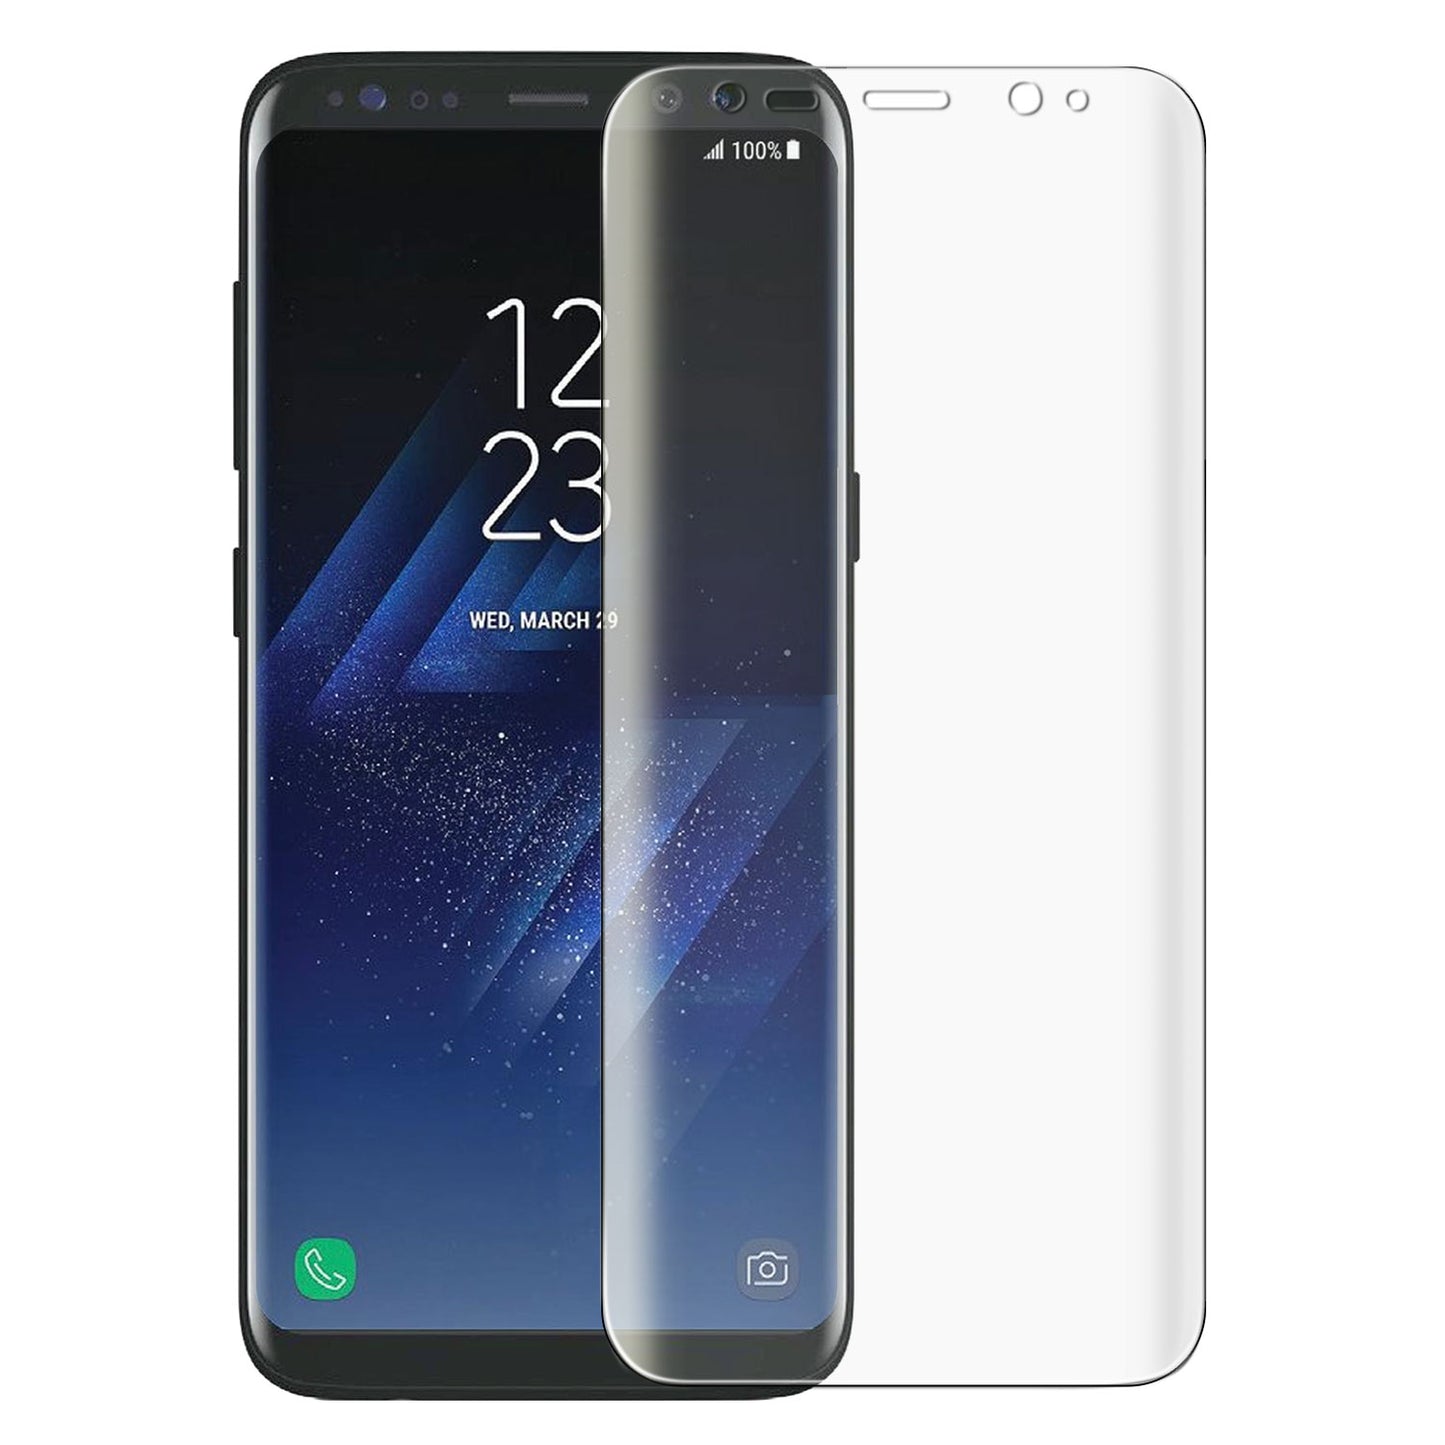 STSAMS8P - Cellet Full Coverage Flexible PET Film Screen Protector for Samsung Galaxy S8 Plus